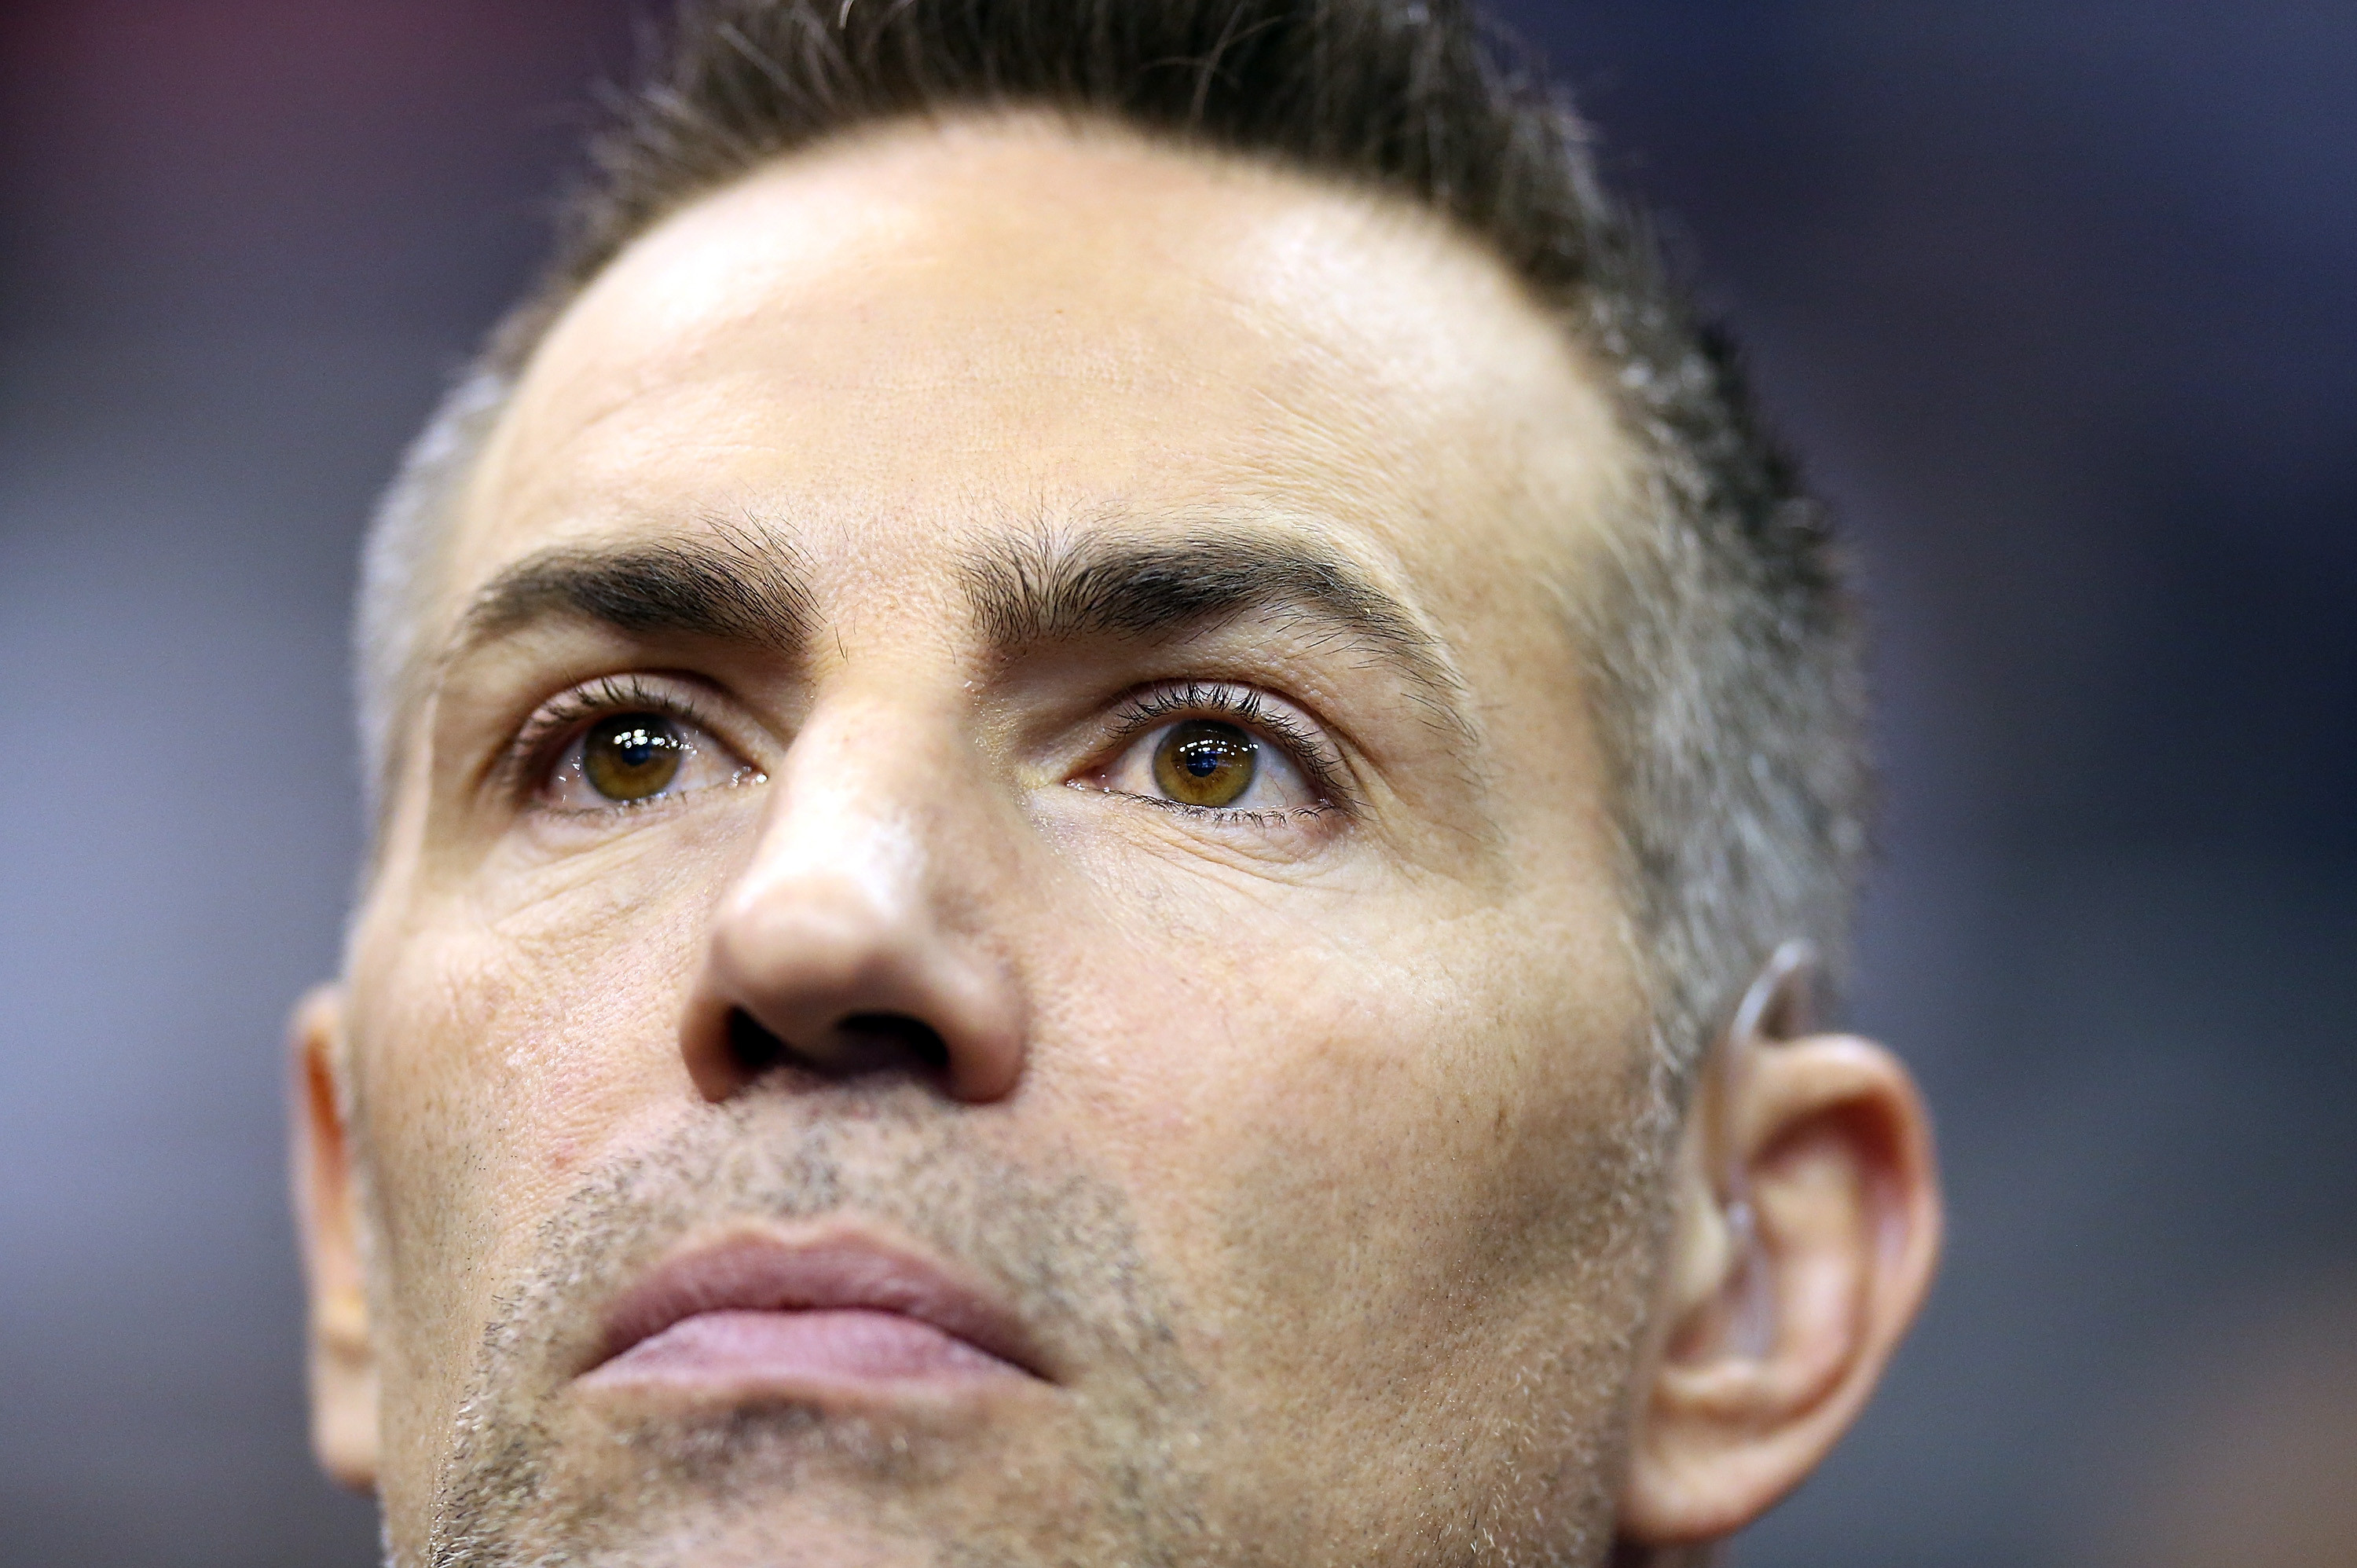 Kurt Warner is one of the greatest success stories in NFL history. Warner spent part of his hefty earnings on a home for his disabled son, Zach.